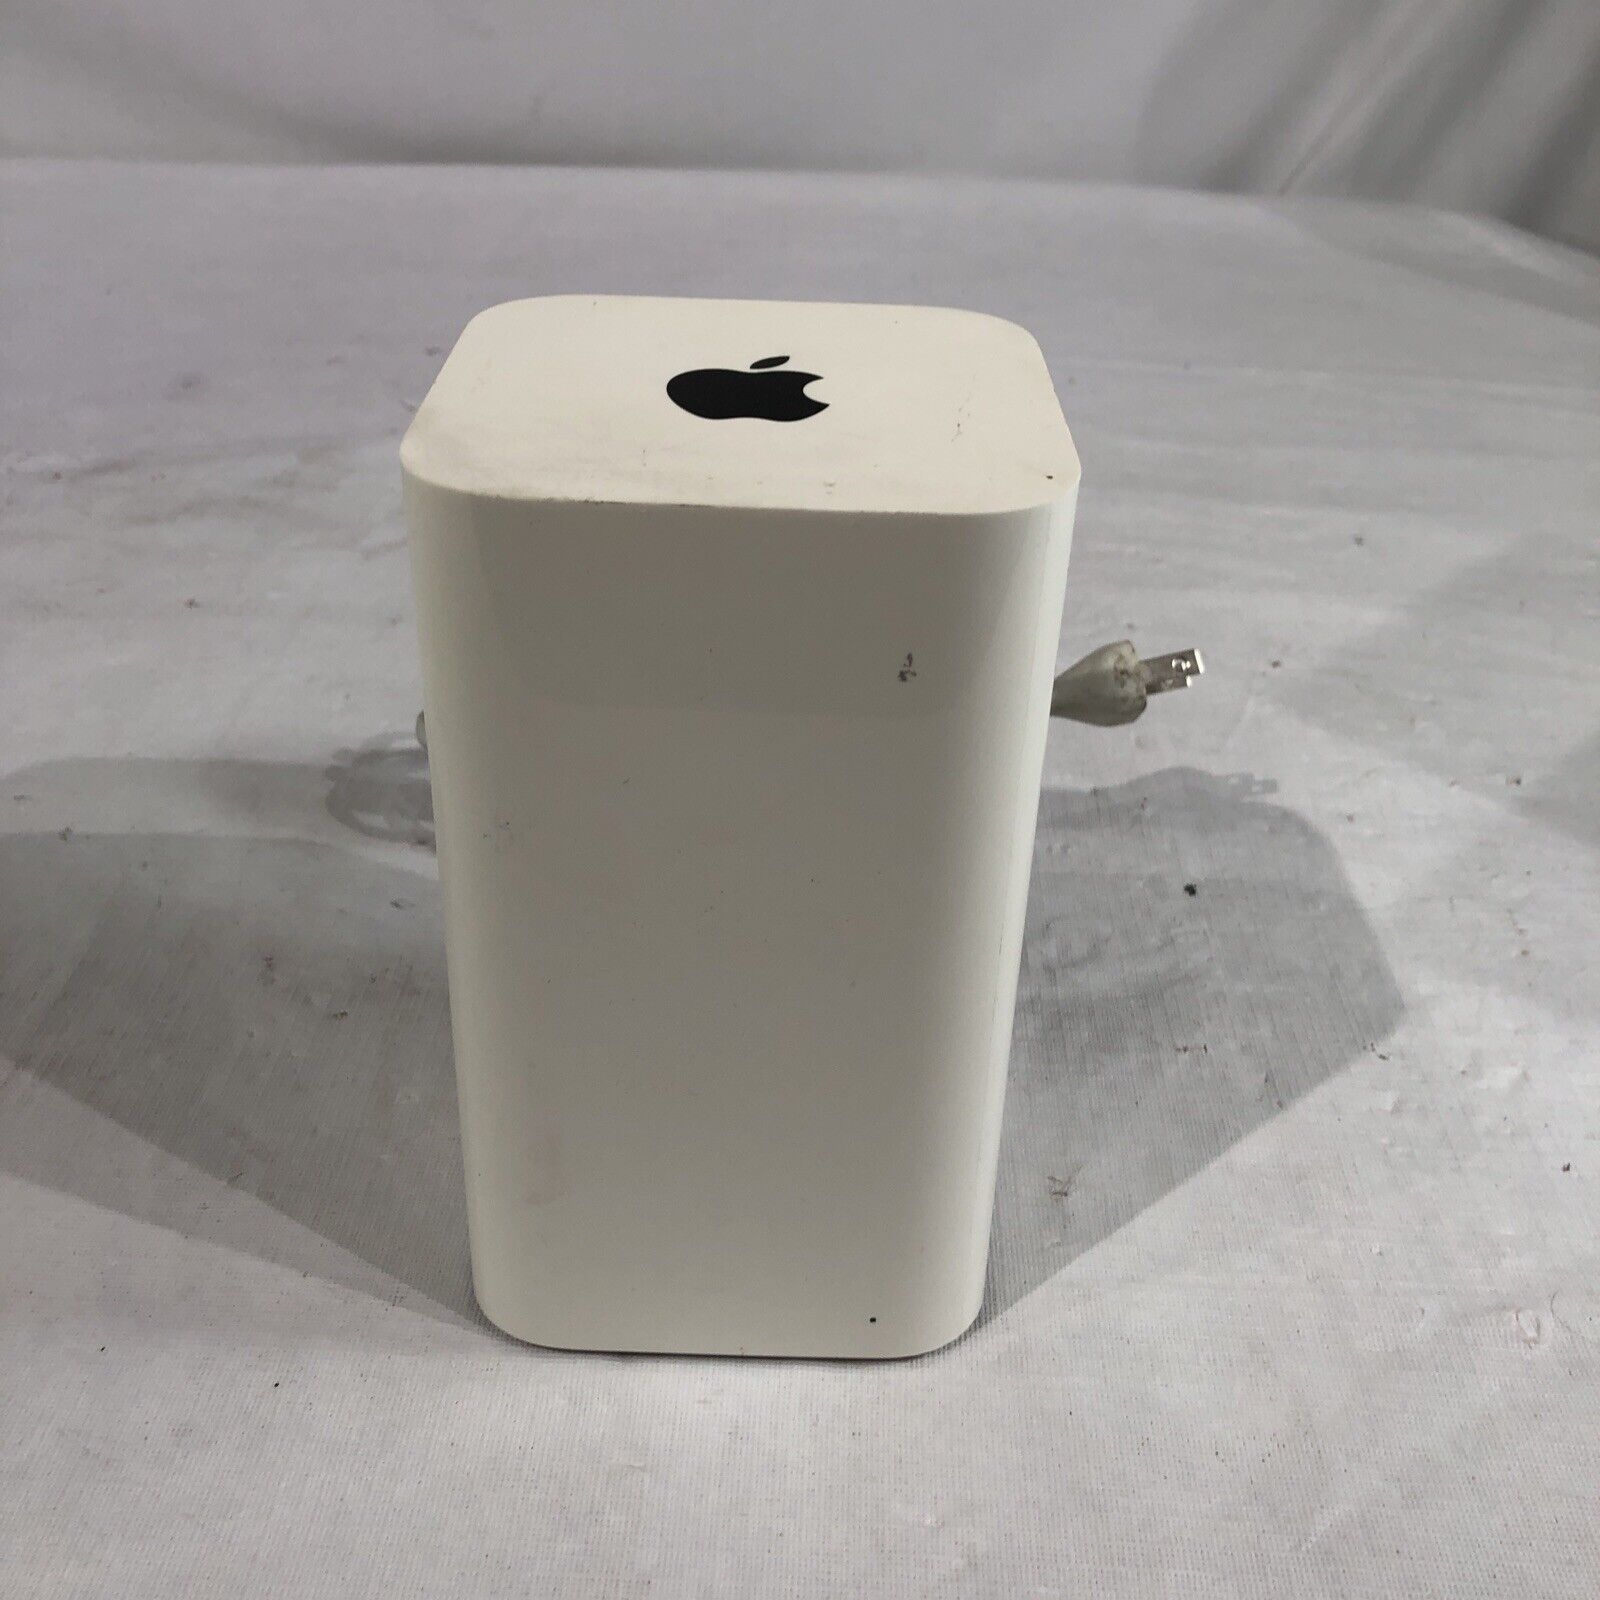 Apple AirPort Extreme 6th 802.11ac Wireless Router 3 Gigabit 1 USB A1521 w/Cable